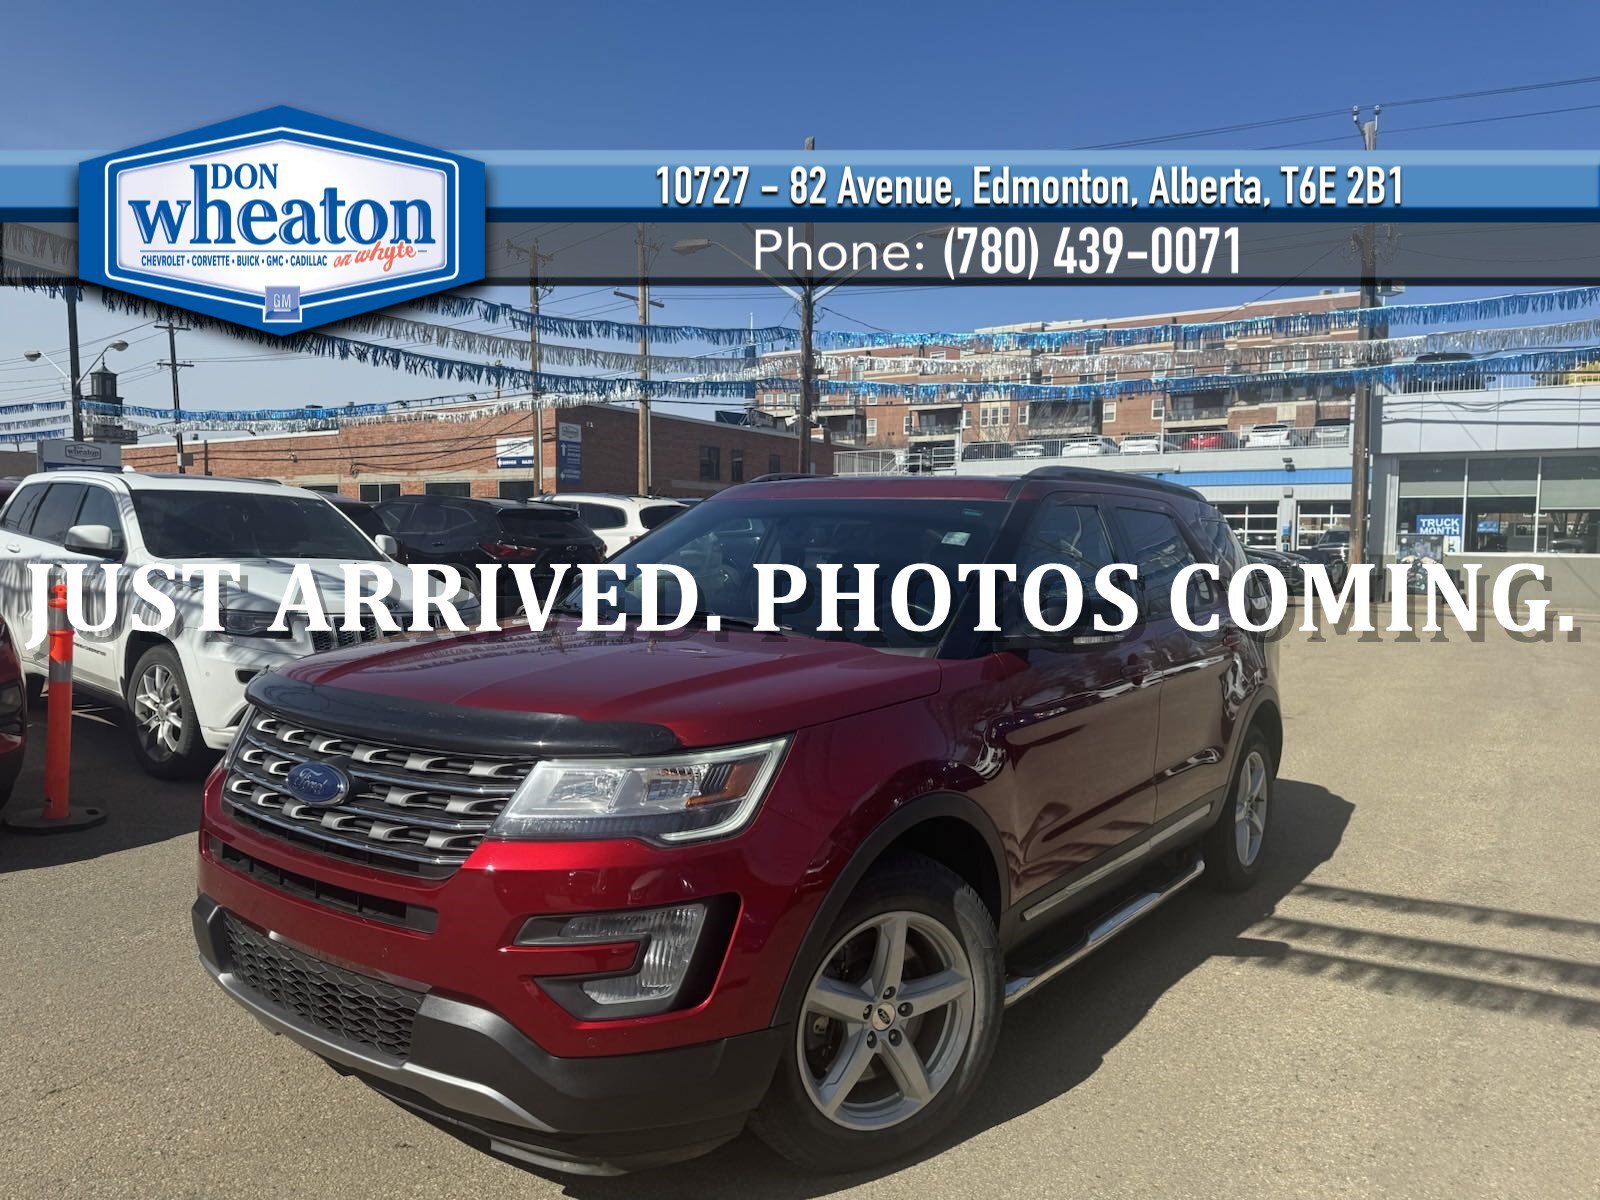 2016 Ford Explorer XLT 4x4 Sunroof Heated Leather Third Row